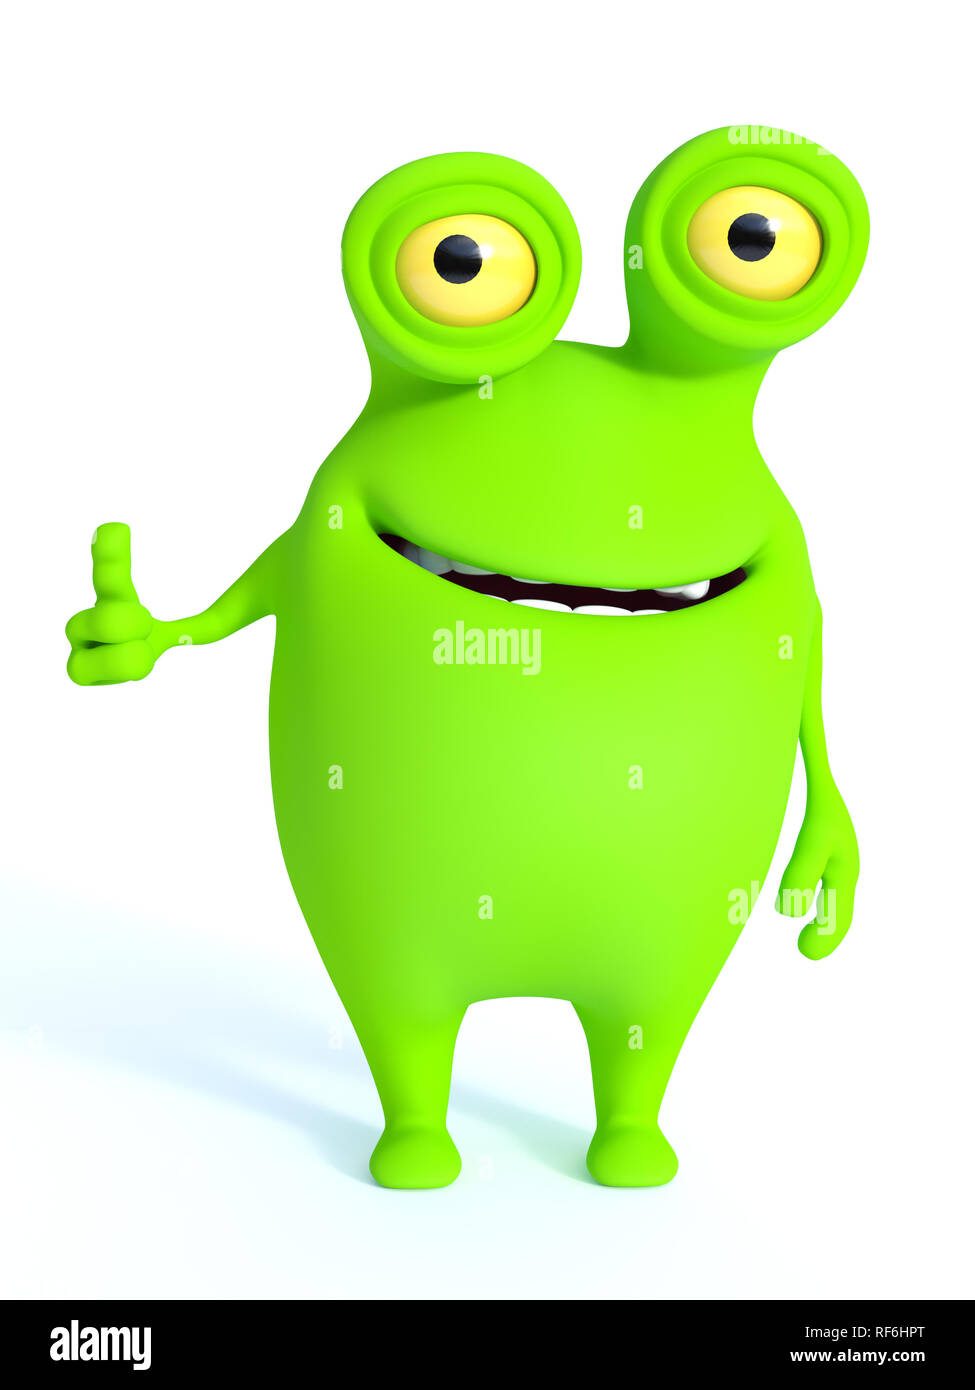 A cute charming green cartoon monster doing a thumbs up. White background  Stock Photo - Alamy